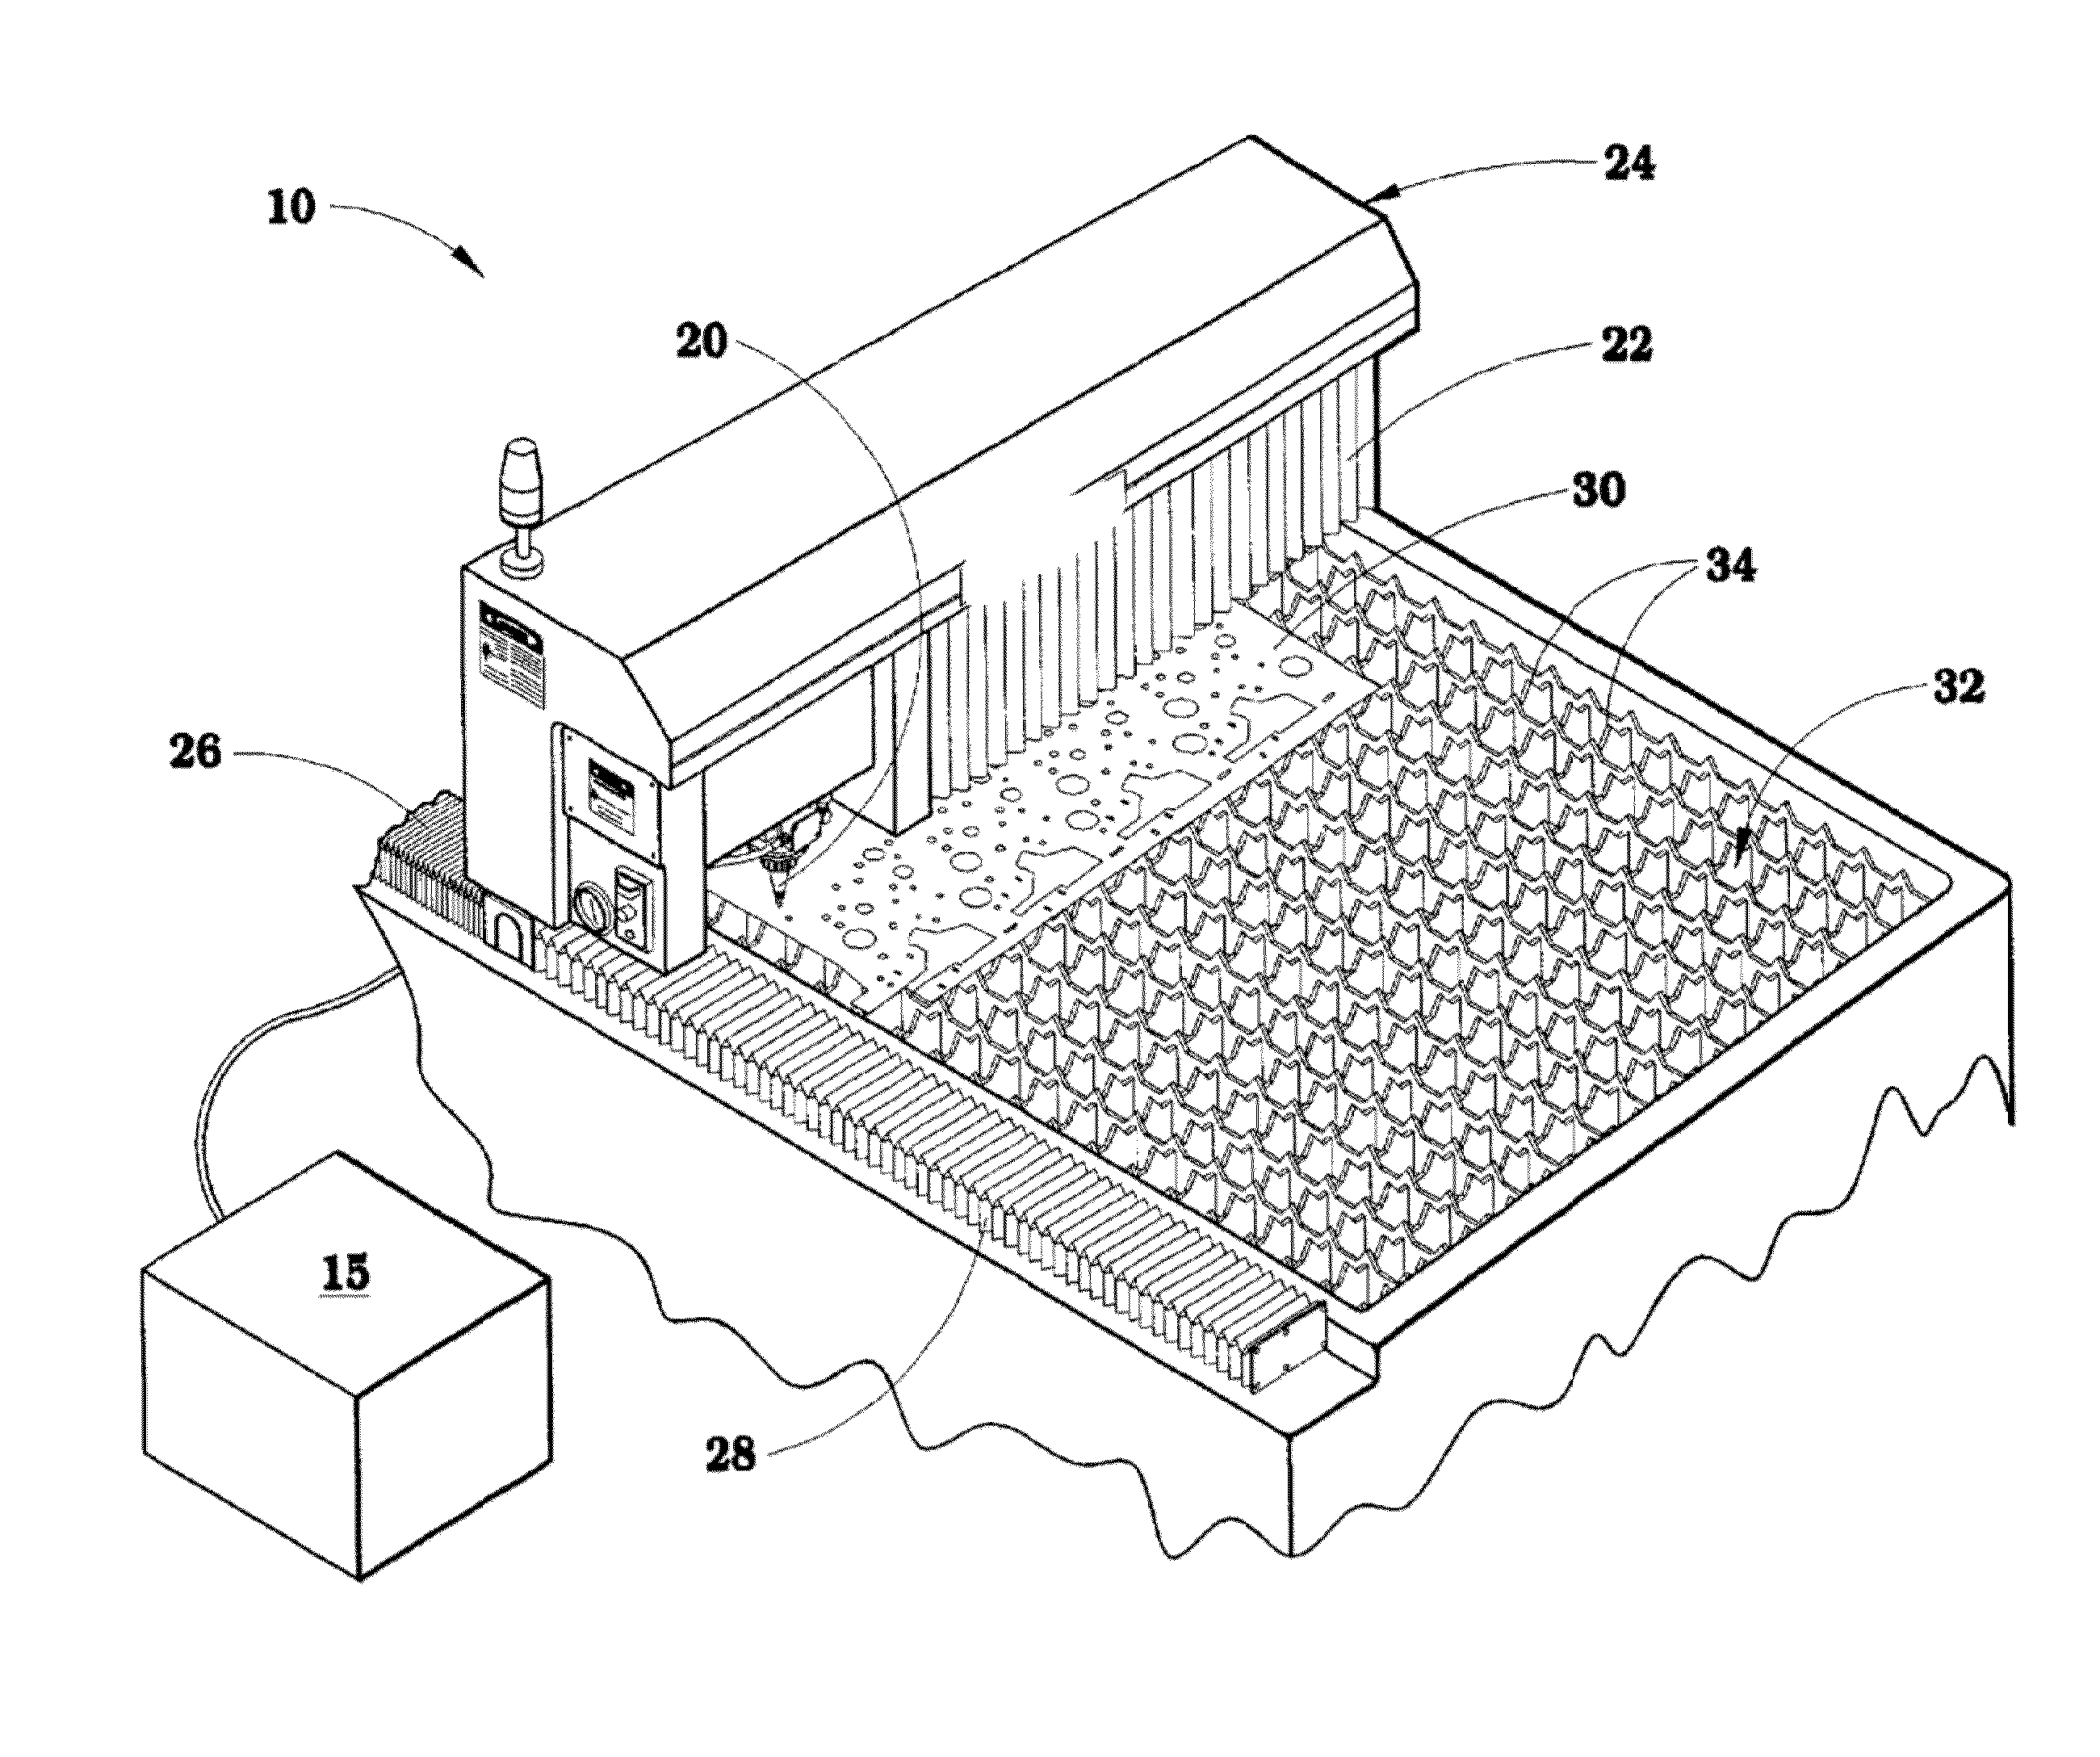 System and Method for Controlling Machines According to Pattern of Contours